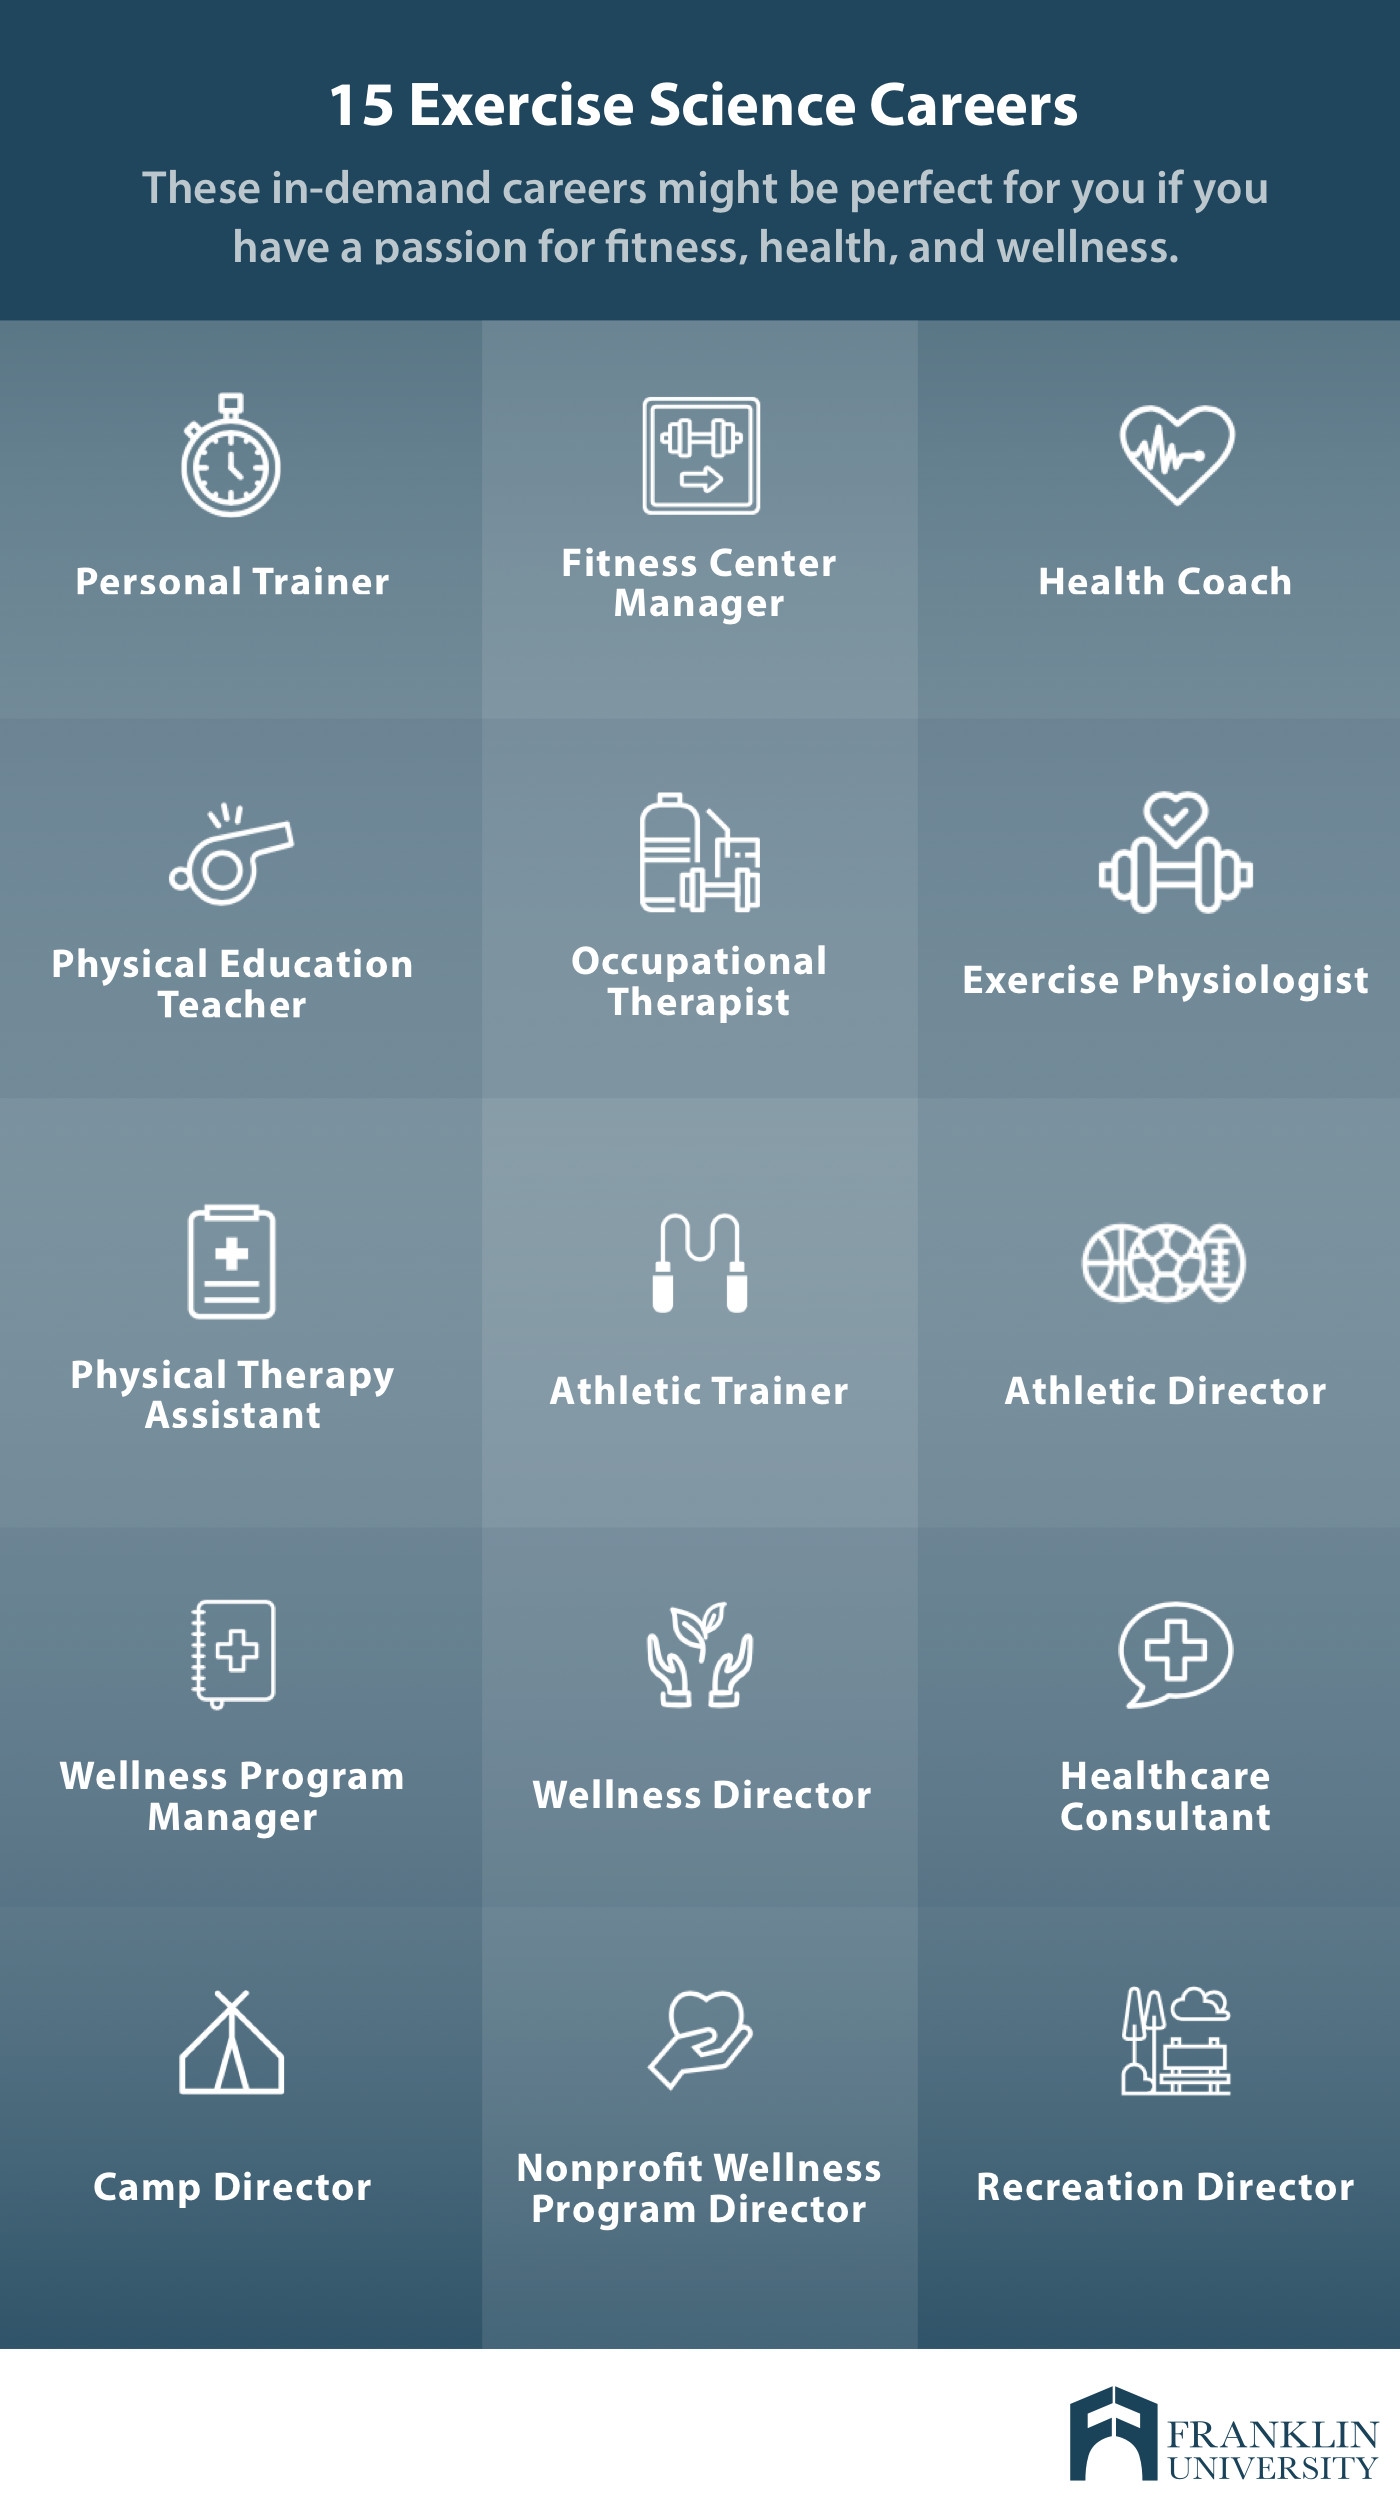 A Career as an Athletic Director: Description, Duties and Degree